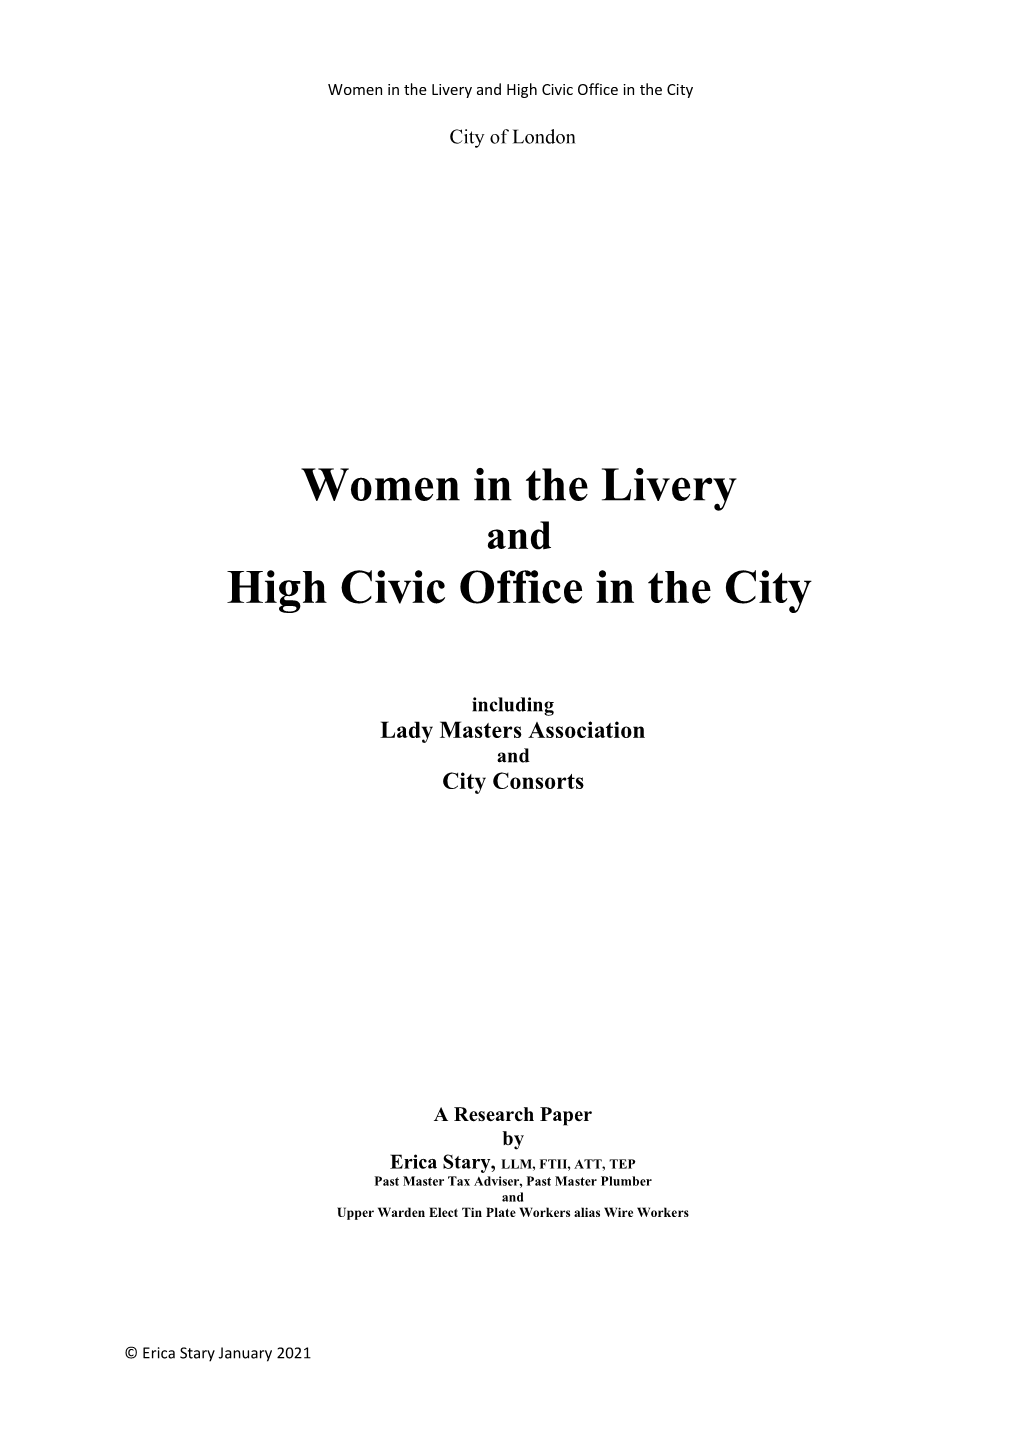 Women in the Livery High Civic Office in the City